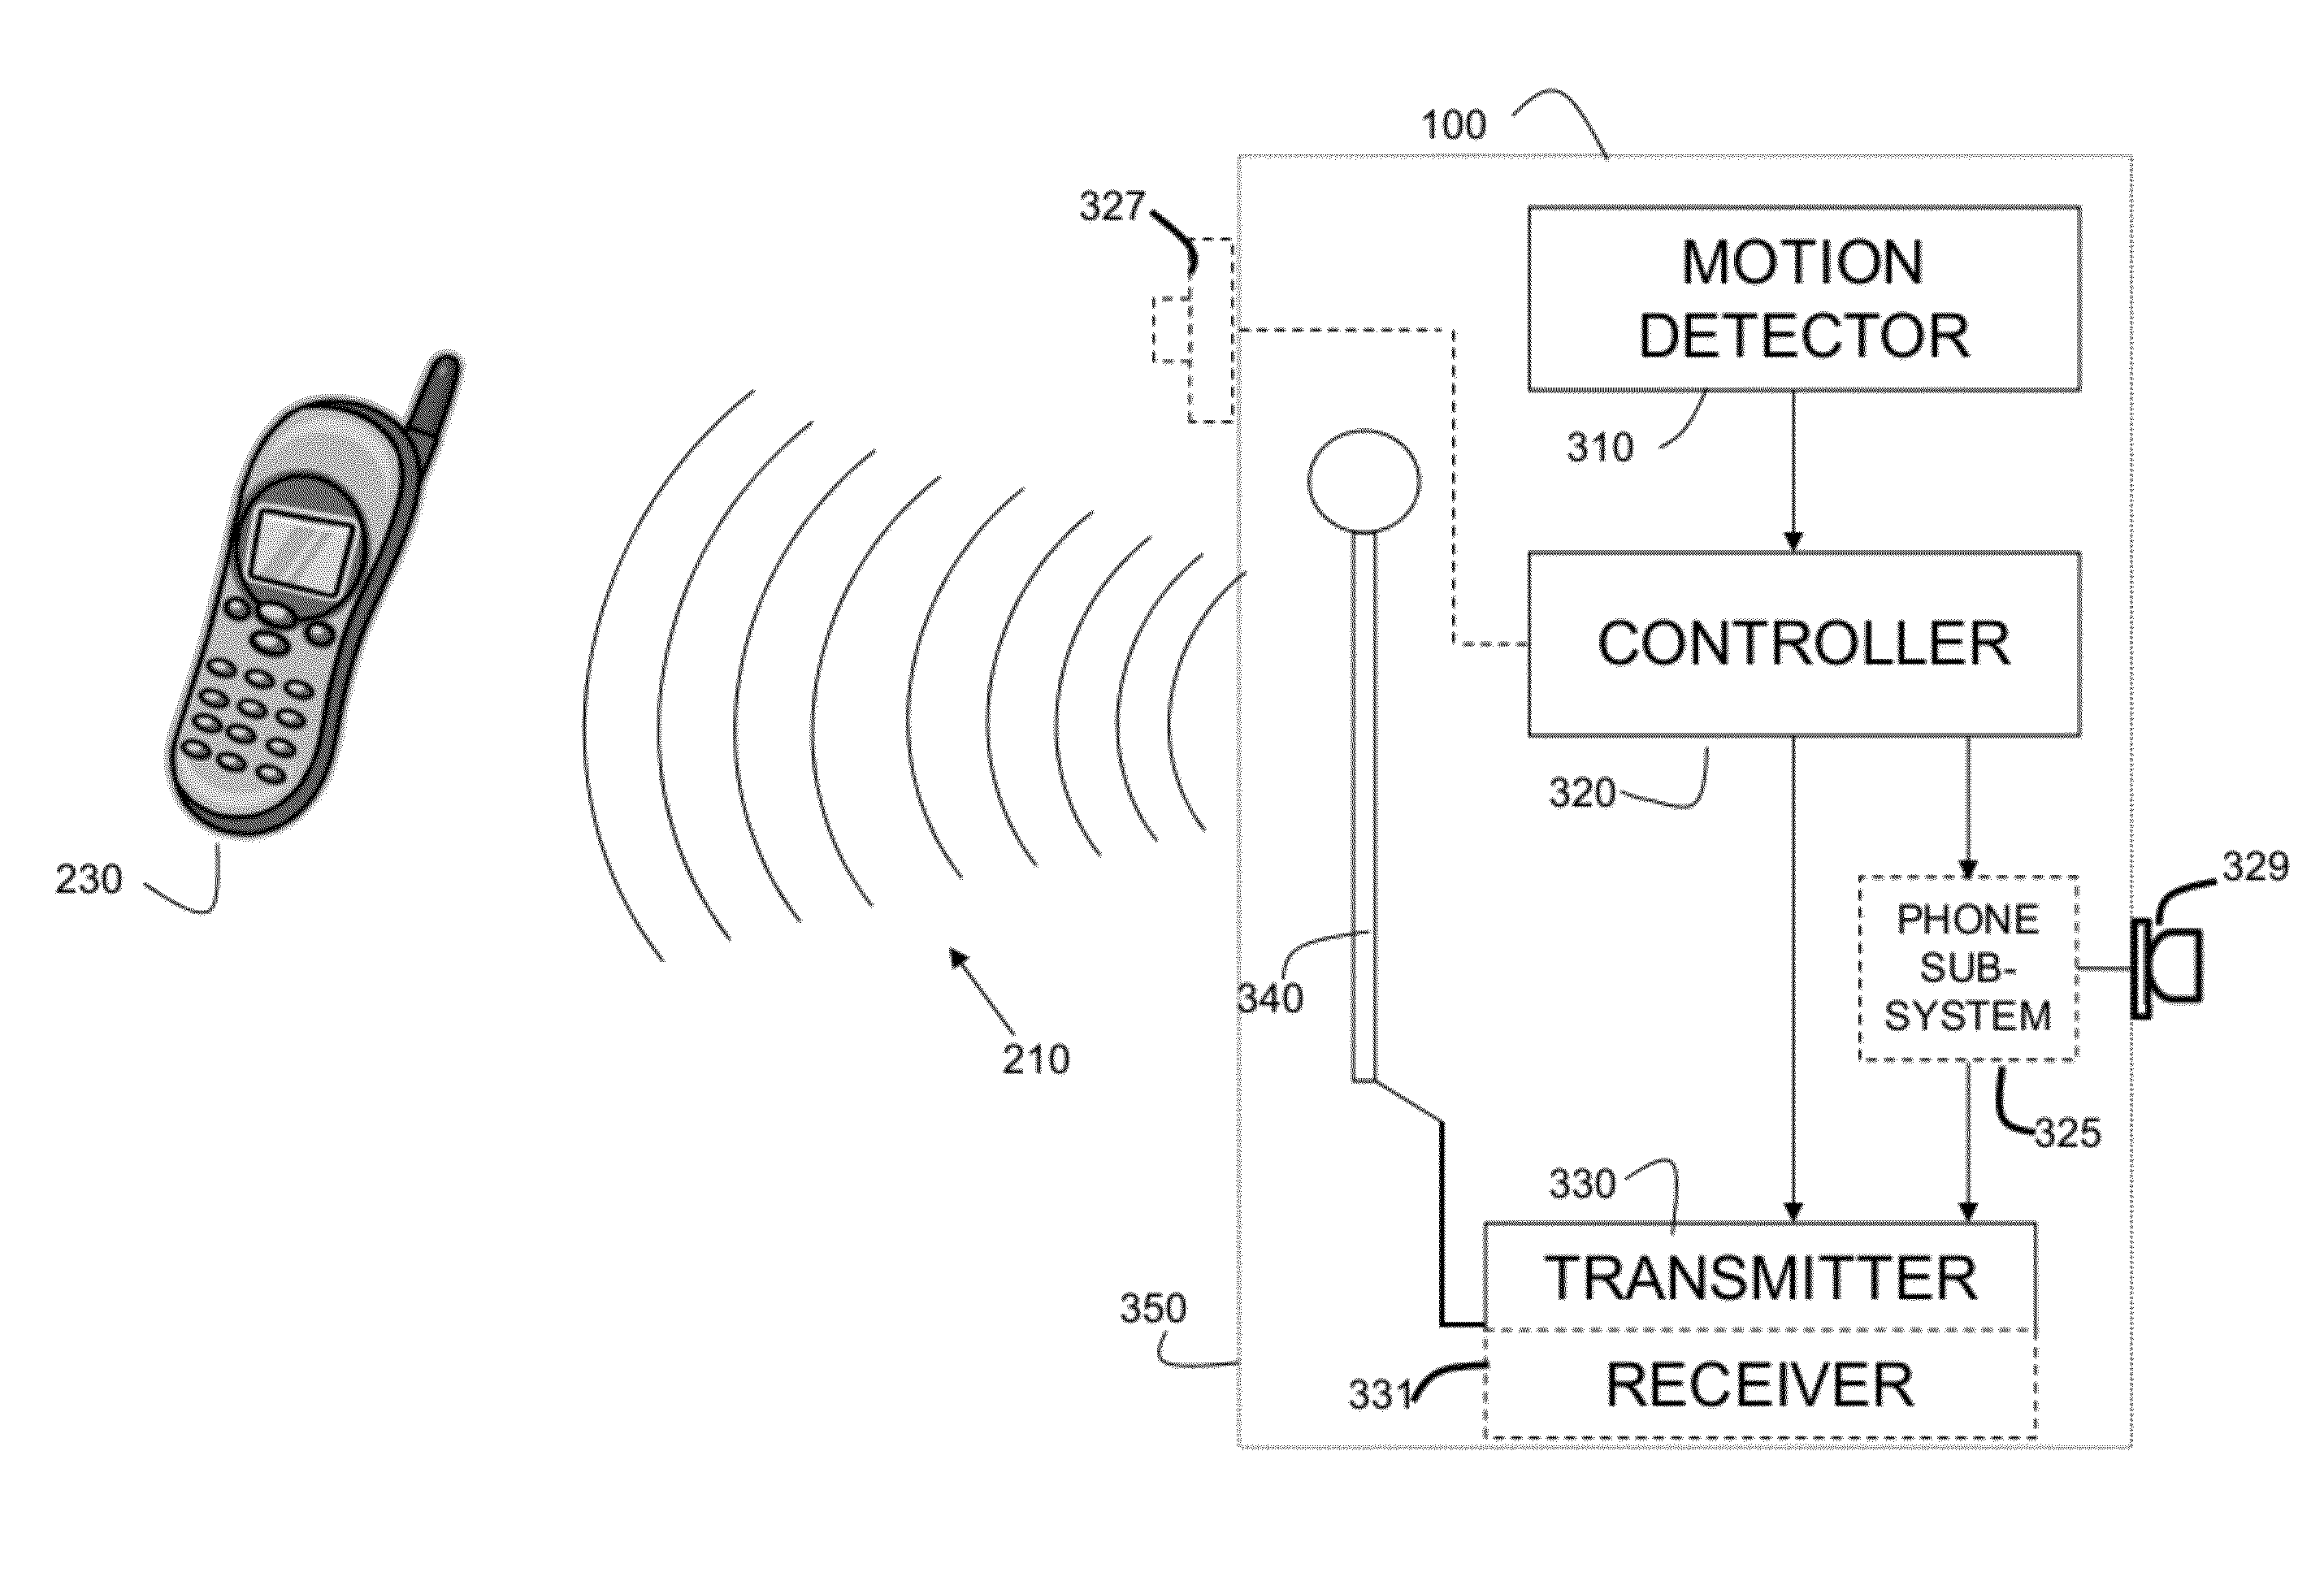 Vehicle safety device for reducing driver distractions